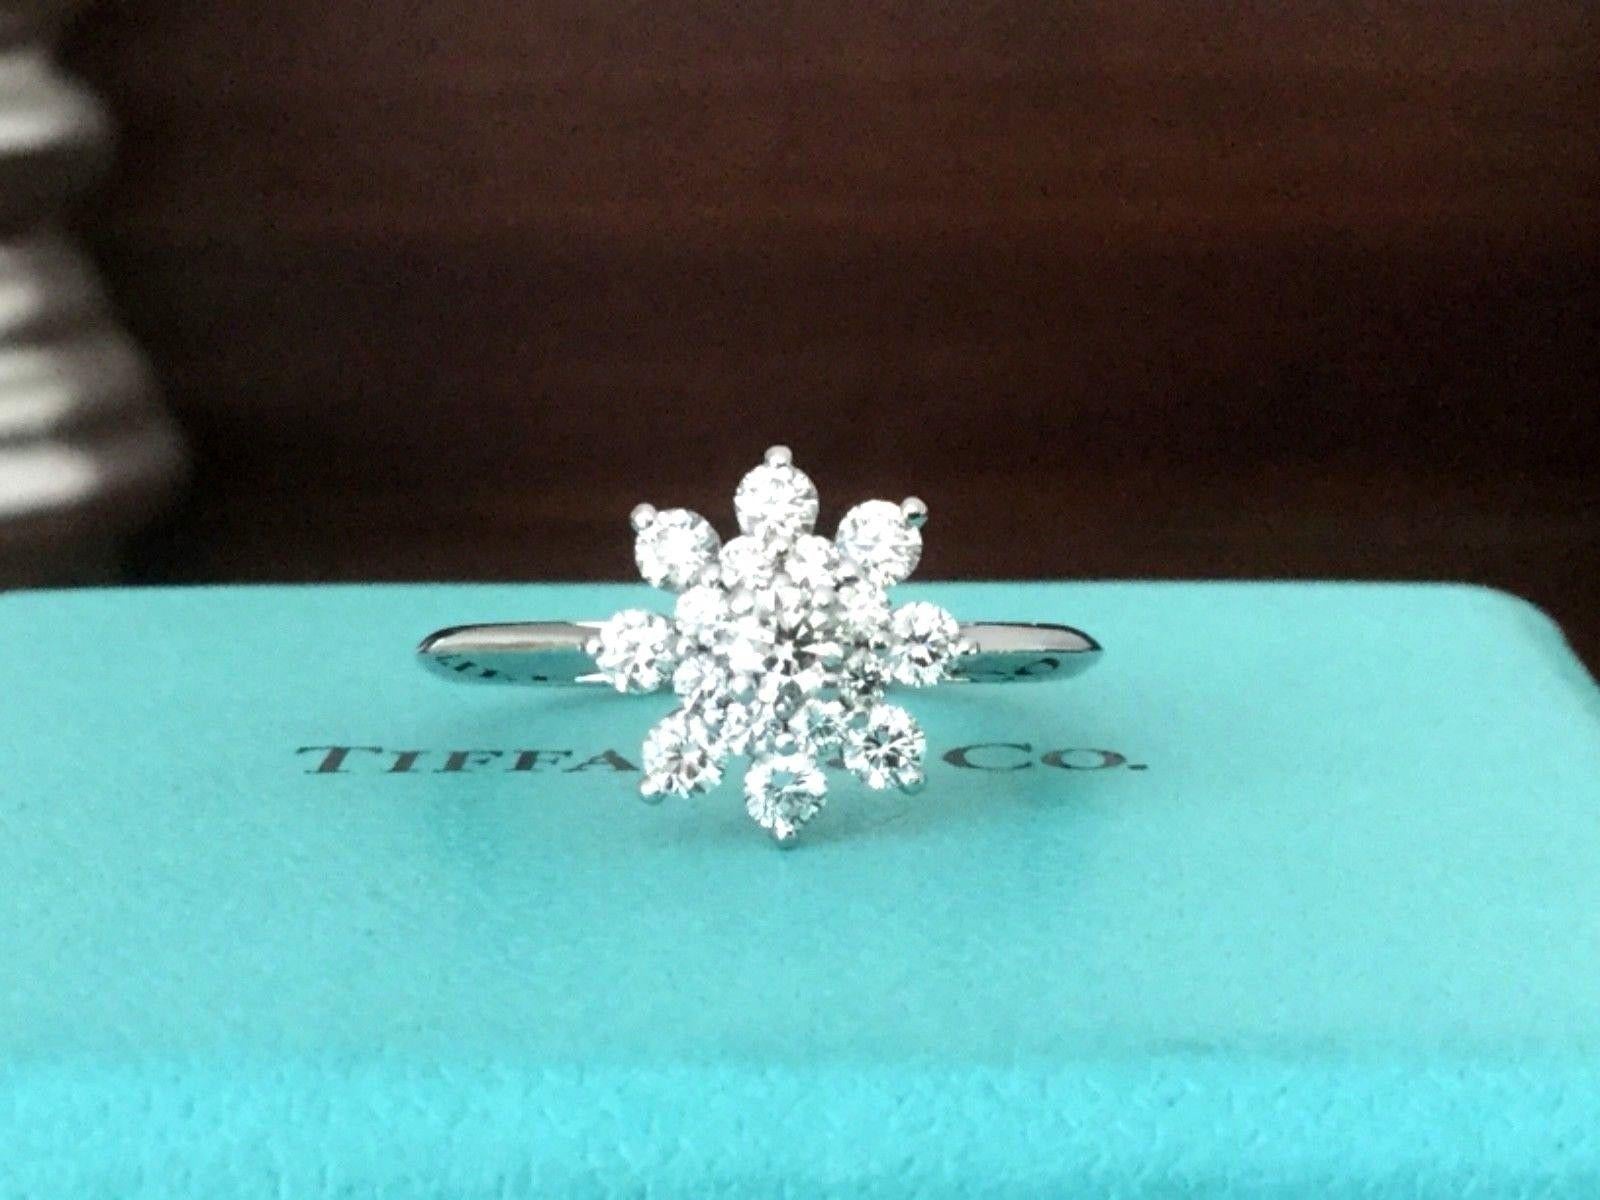 Tiffany & Co. Platinum and Diamond Flower Ring .60 Carat In Excellent Condition For Sale In Middletown, DE